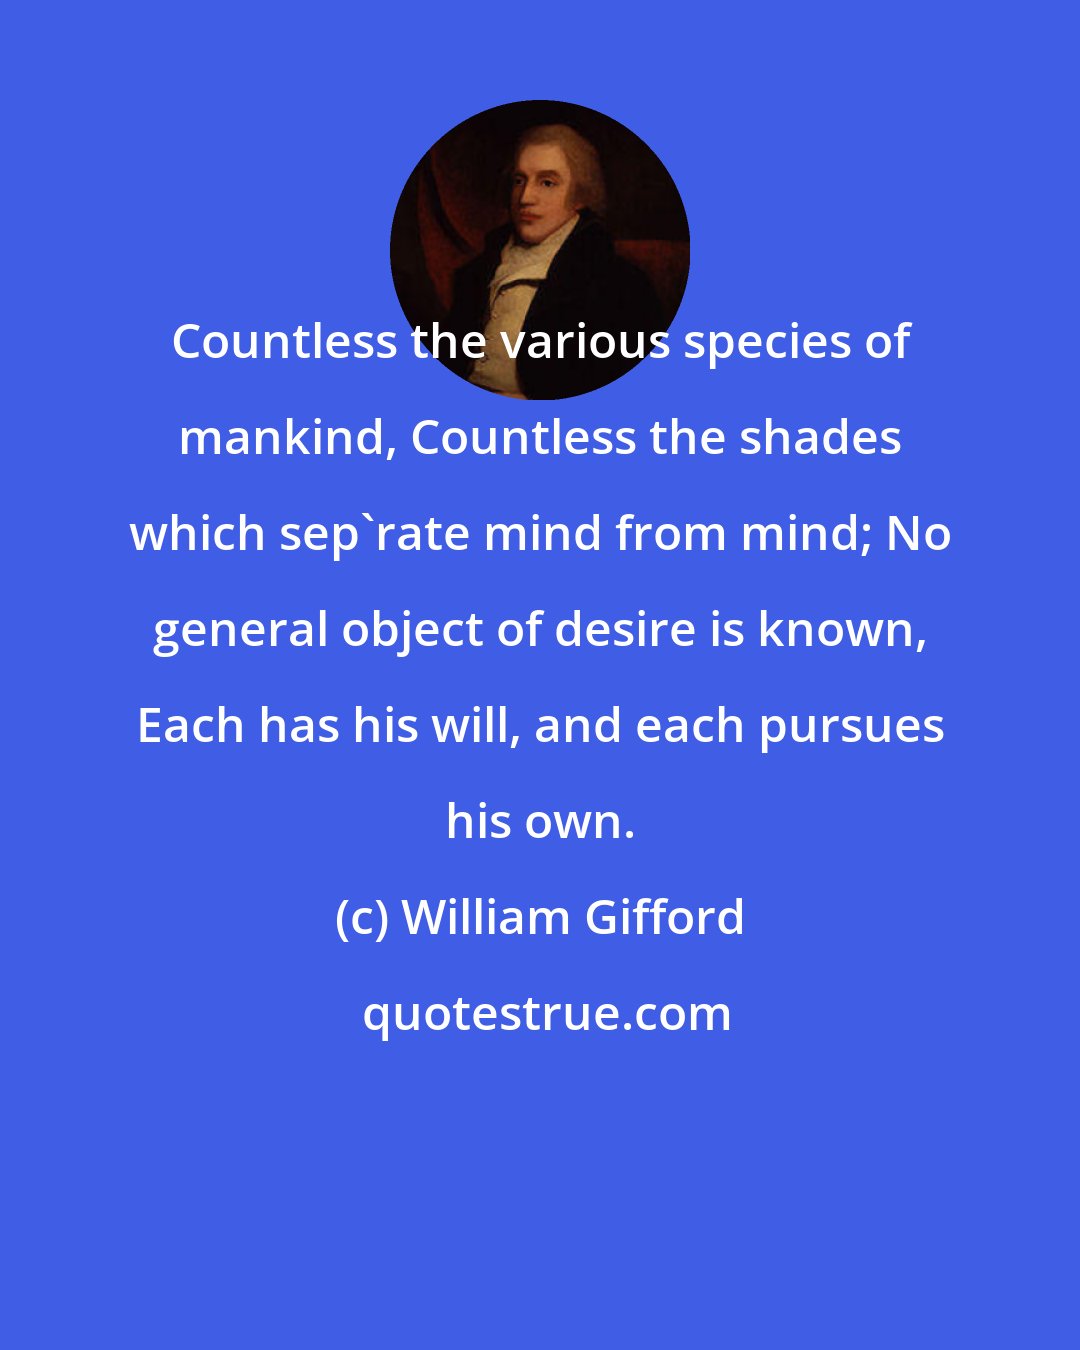 William Gifford: Countless the various species of mankind, Countless the shades which sep'rate mind from mind; No general object of desire is known, Each has his will, and each pursues his own.